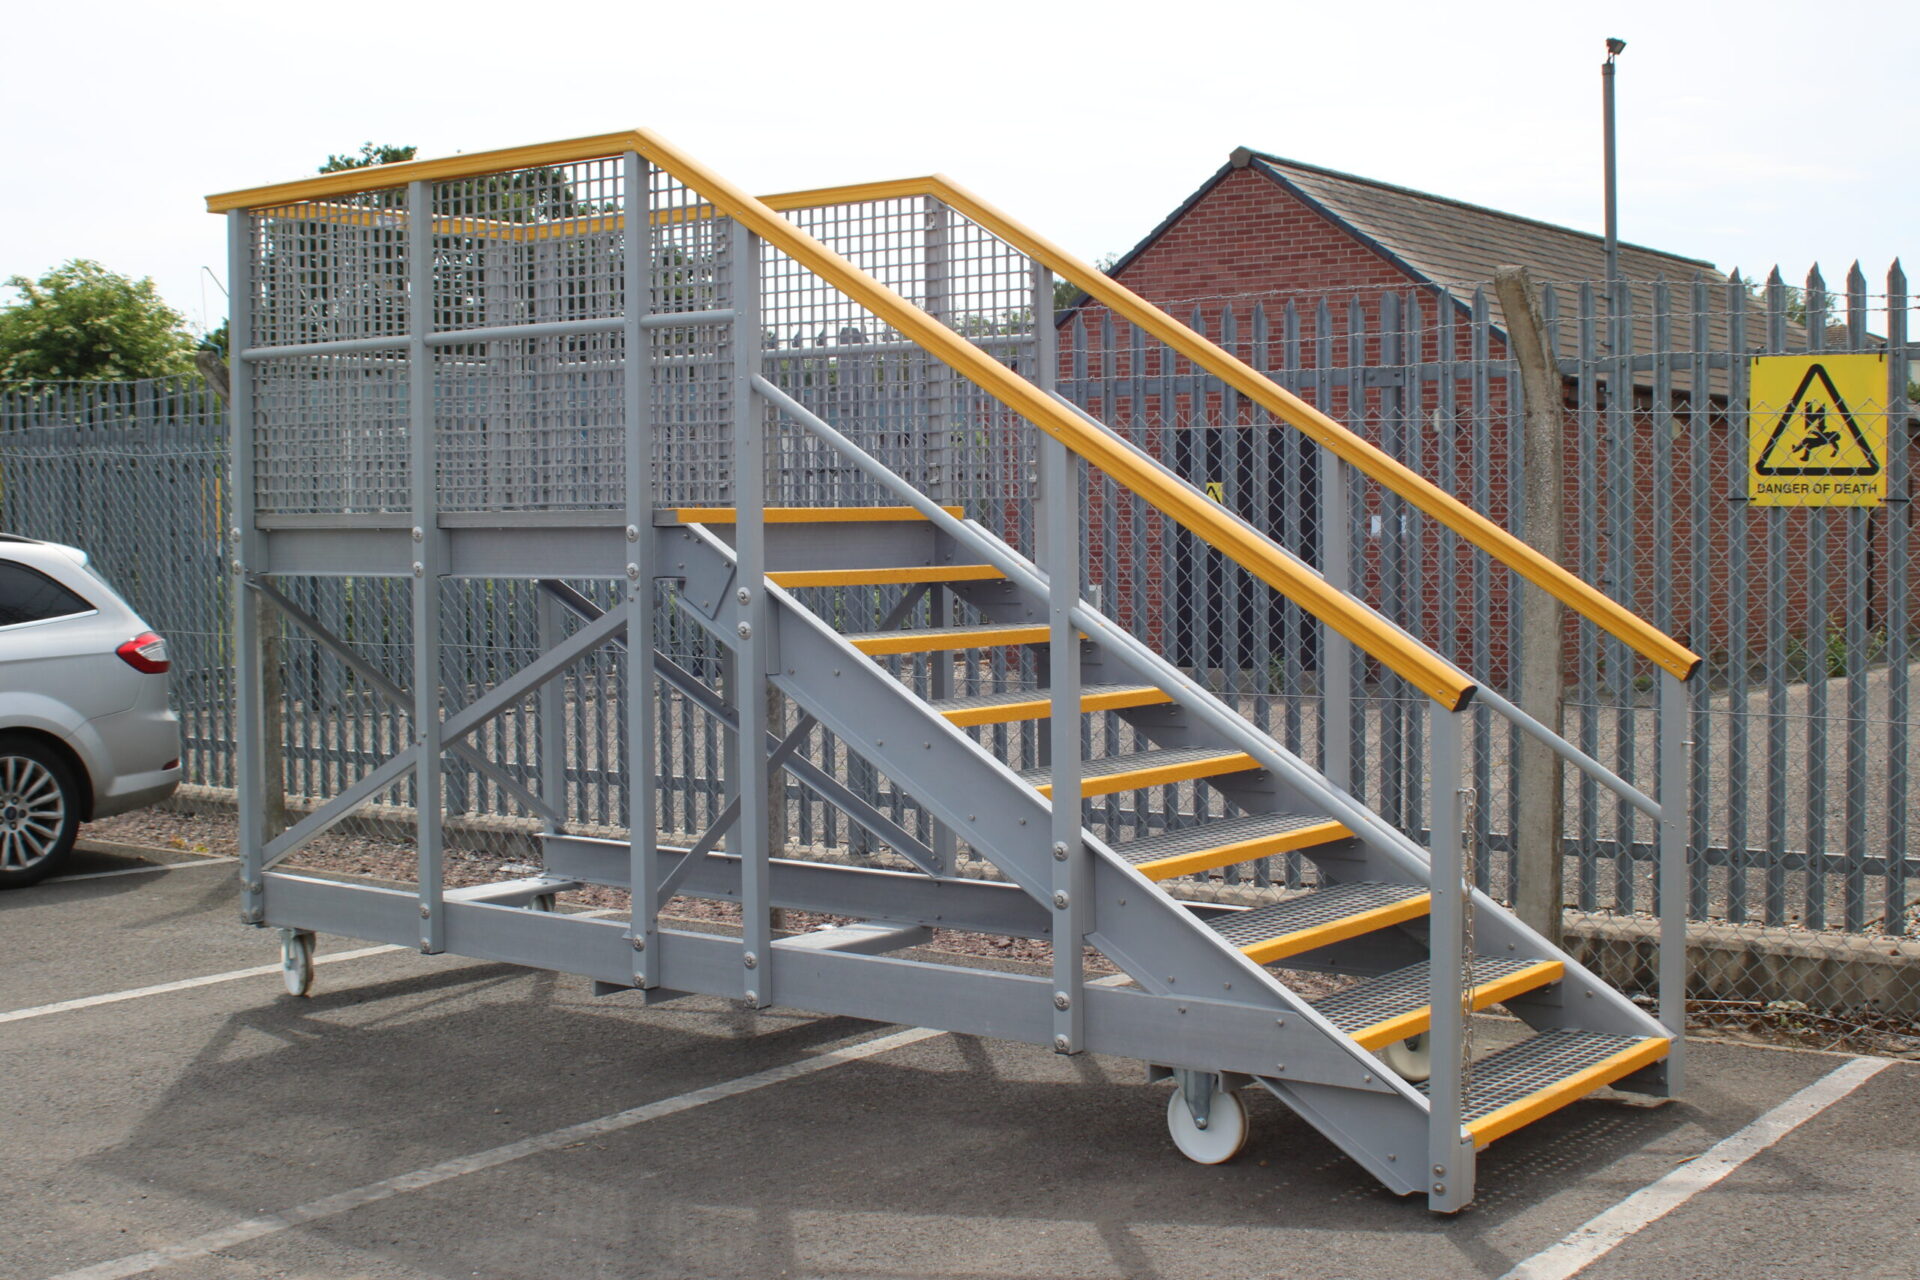 Mobile access platform designed to give visitors to a recycling plant safe access to the containers used to collect waste. Built using GRP profiles, handrail and anti-slip QuartzGrip open mesh grating